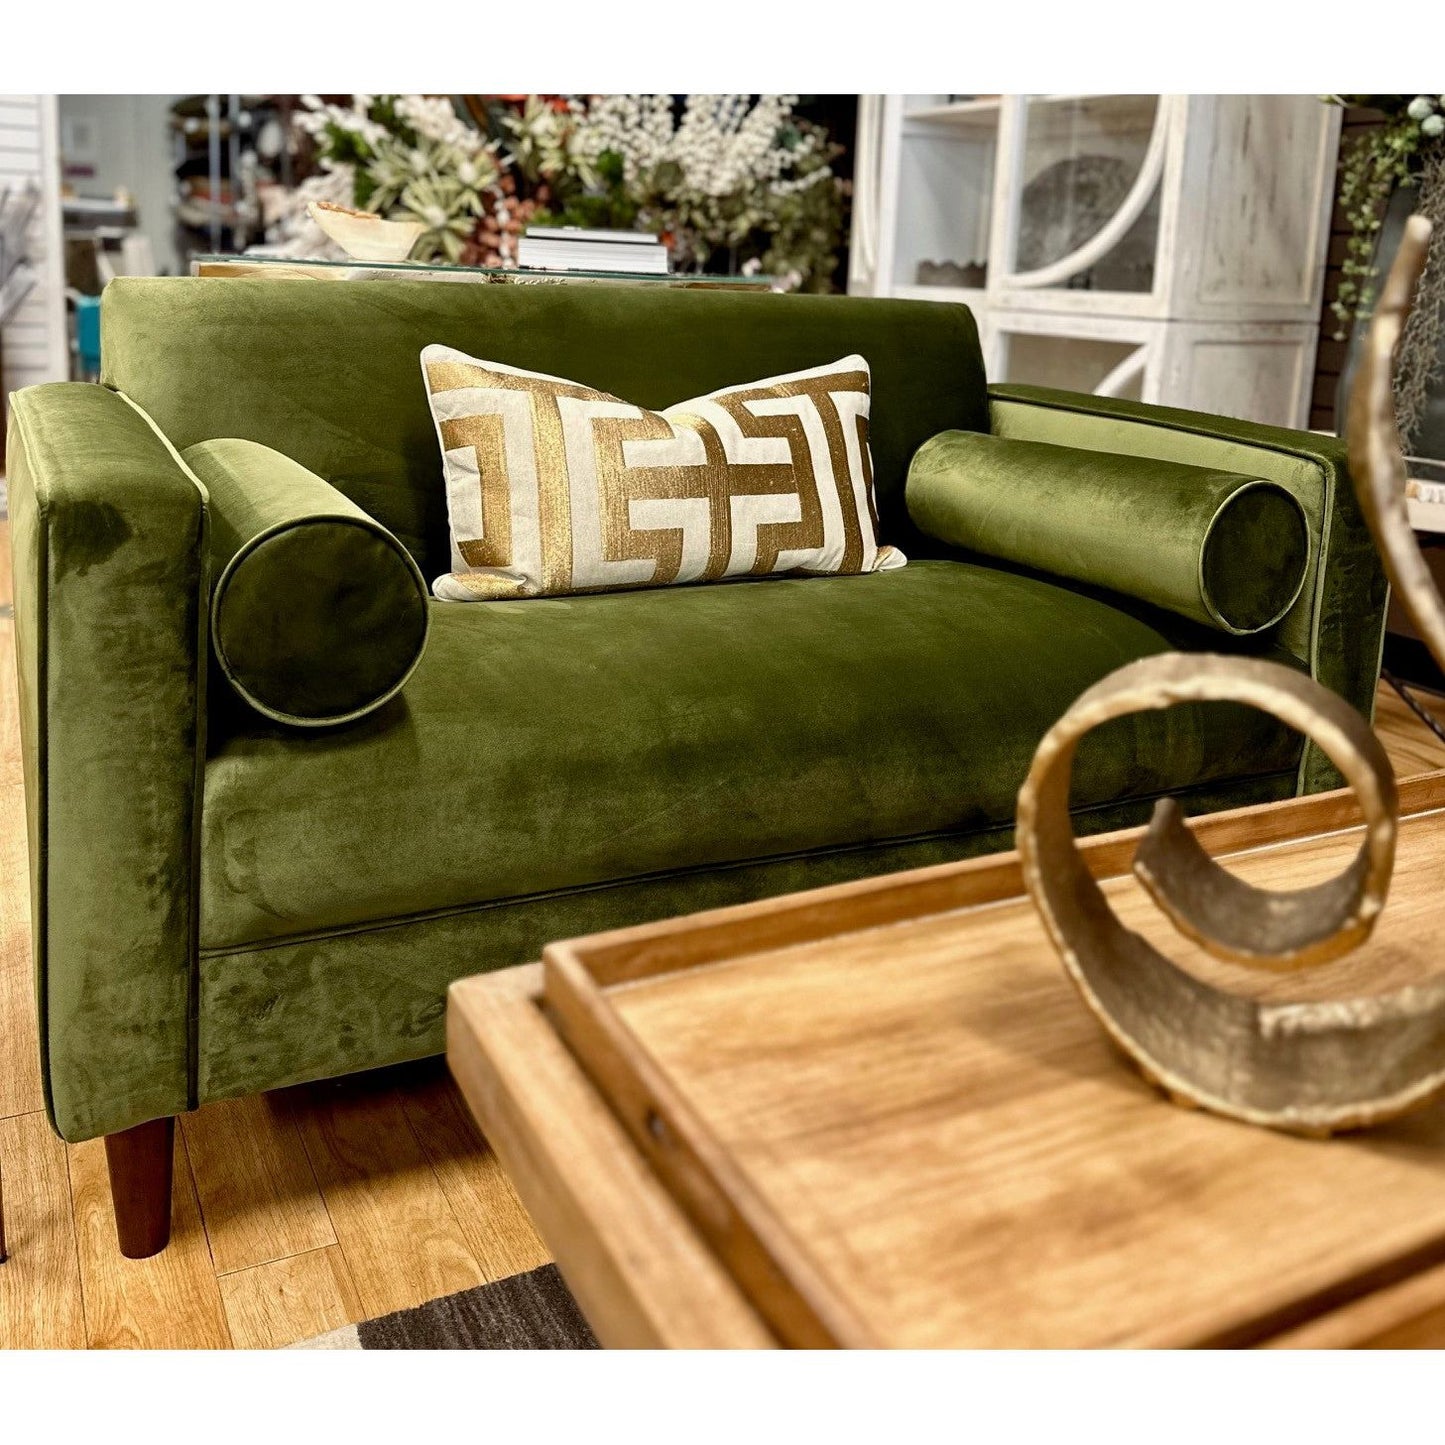 A plush, Bench Velvet Loveseat, Olive Green with two cylindrical side pillows and one decorative geometric-patterned pillow in the center. The loveseat sits in a cozy room setting with a wooden table foreground and floral decor in the background.